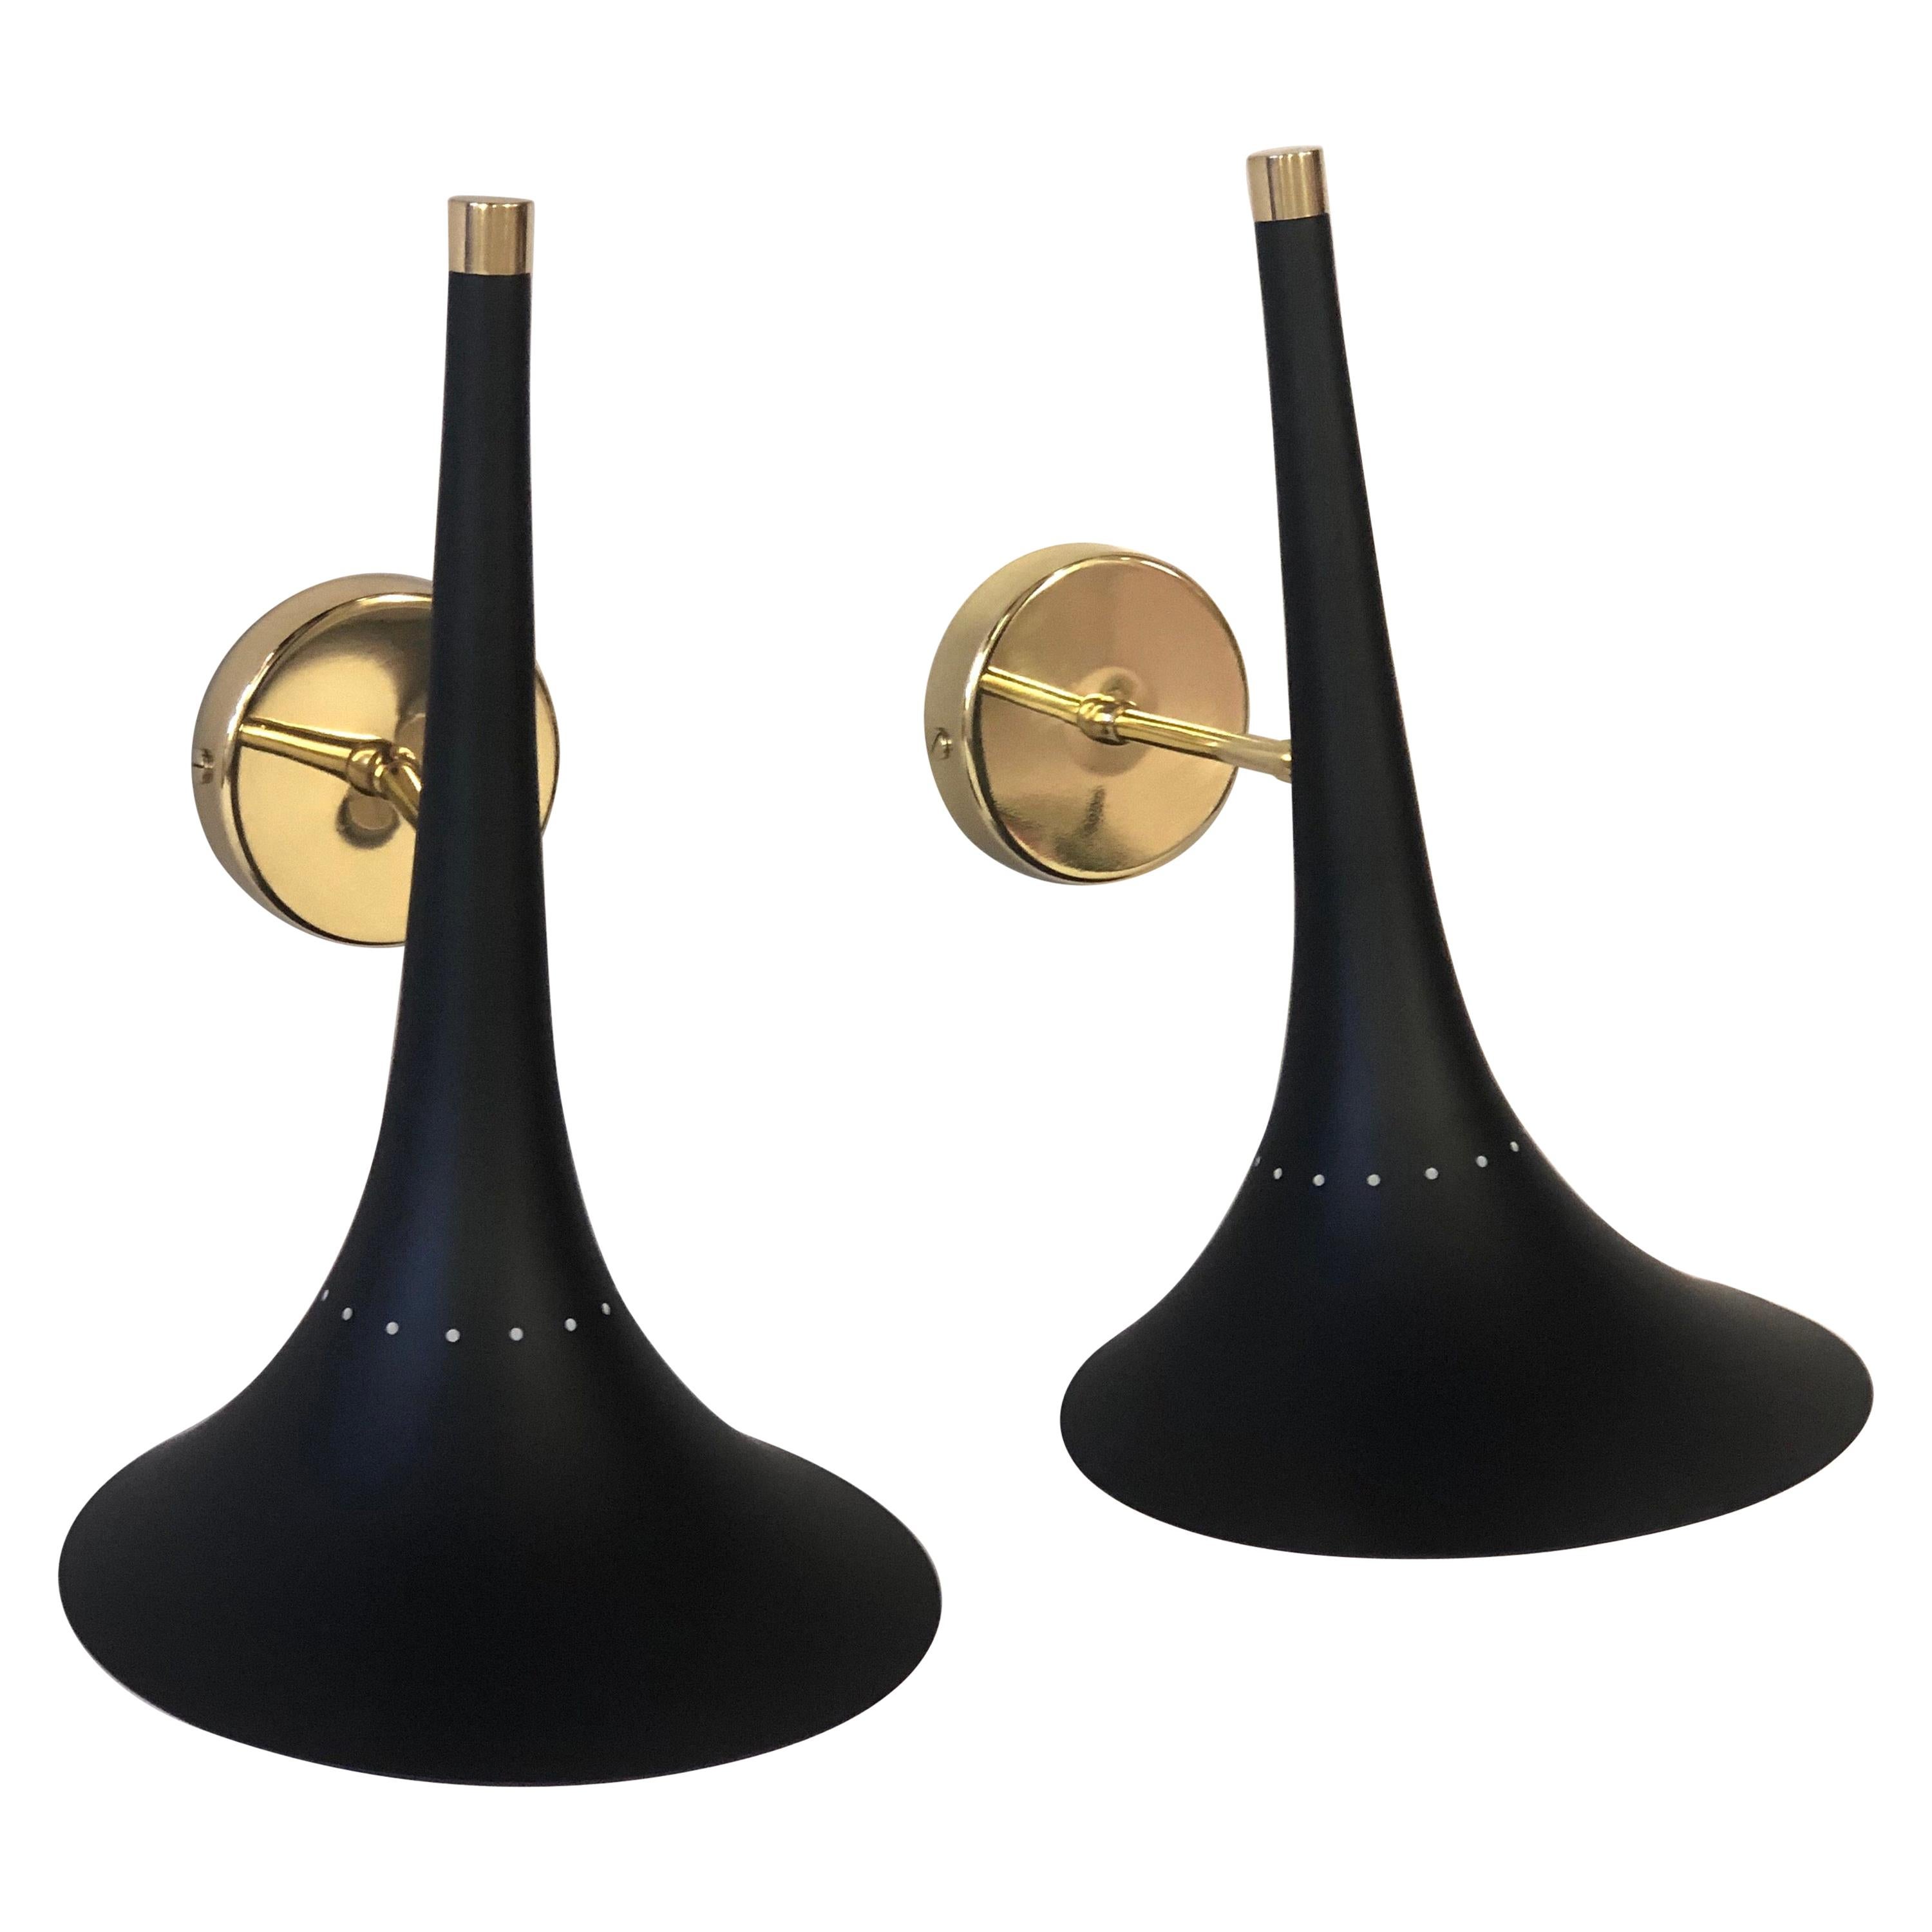 Pair of Italian Mid-Century Modern Sconces Attributed to Stilnovo For Sale 1